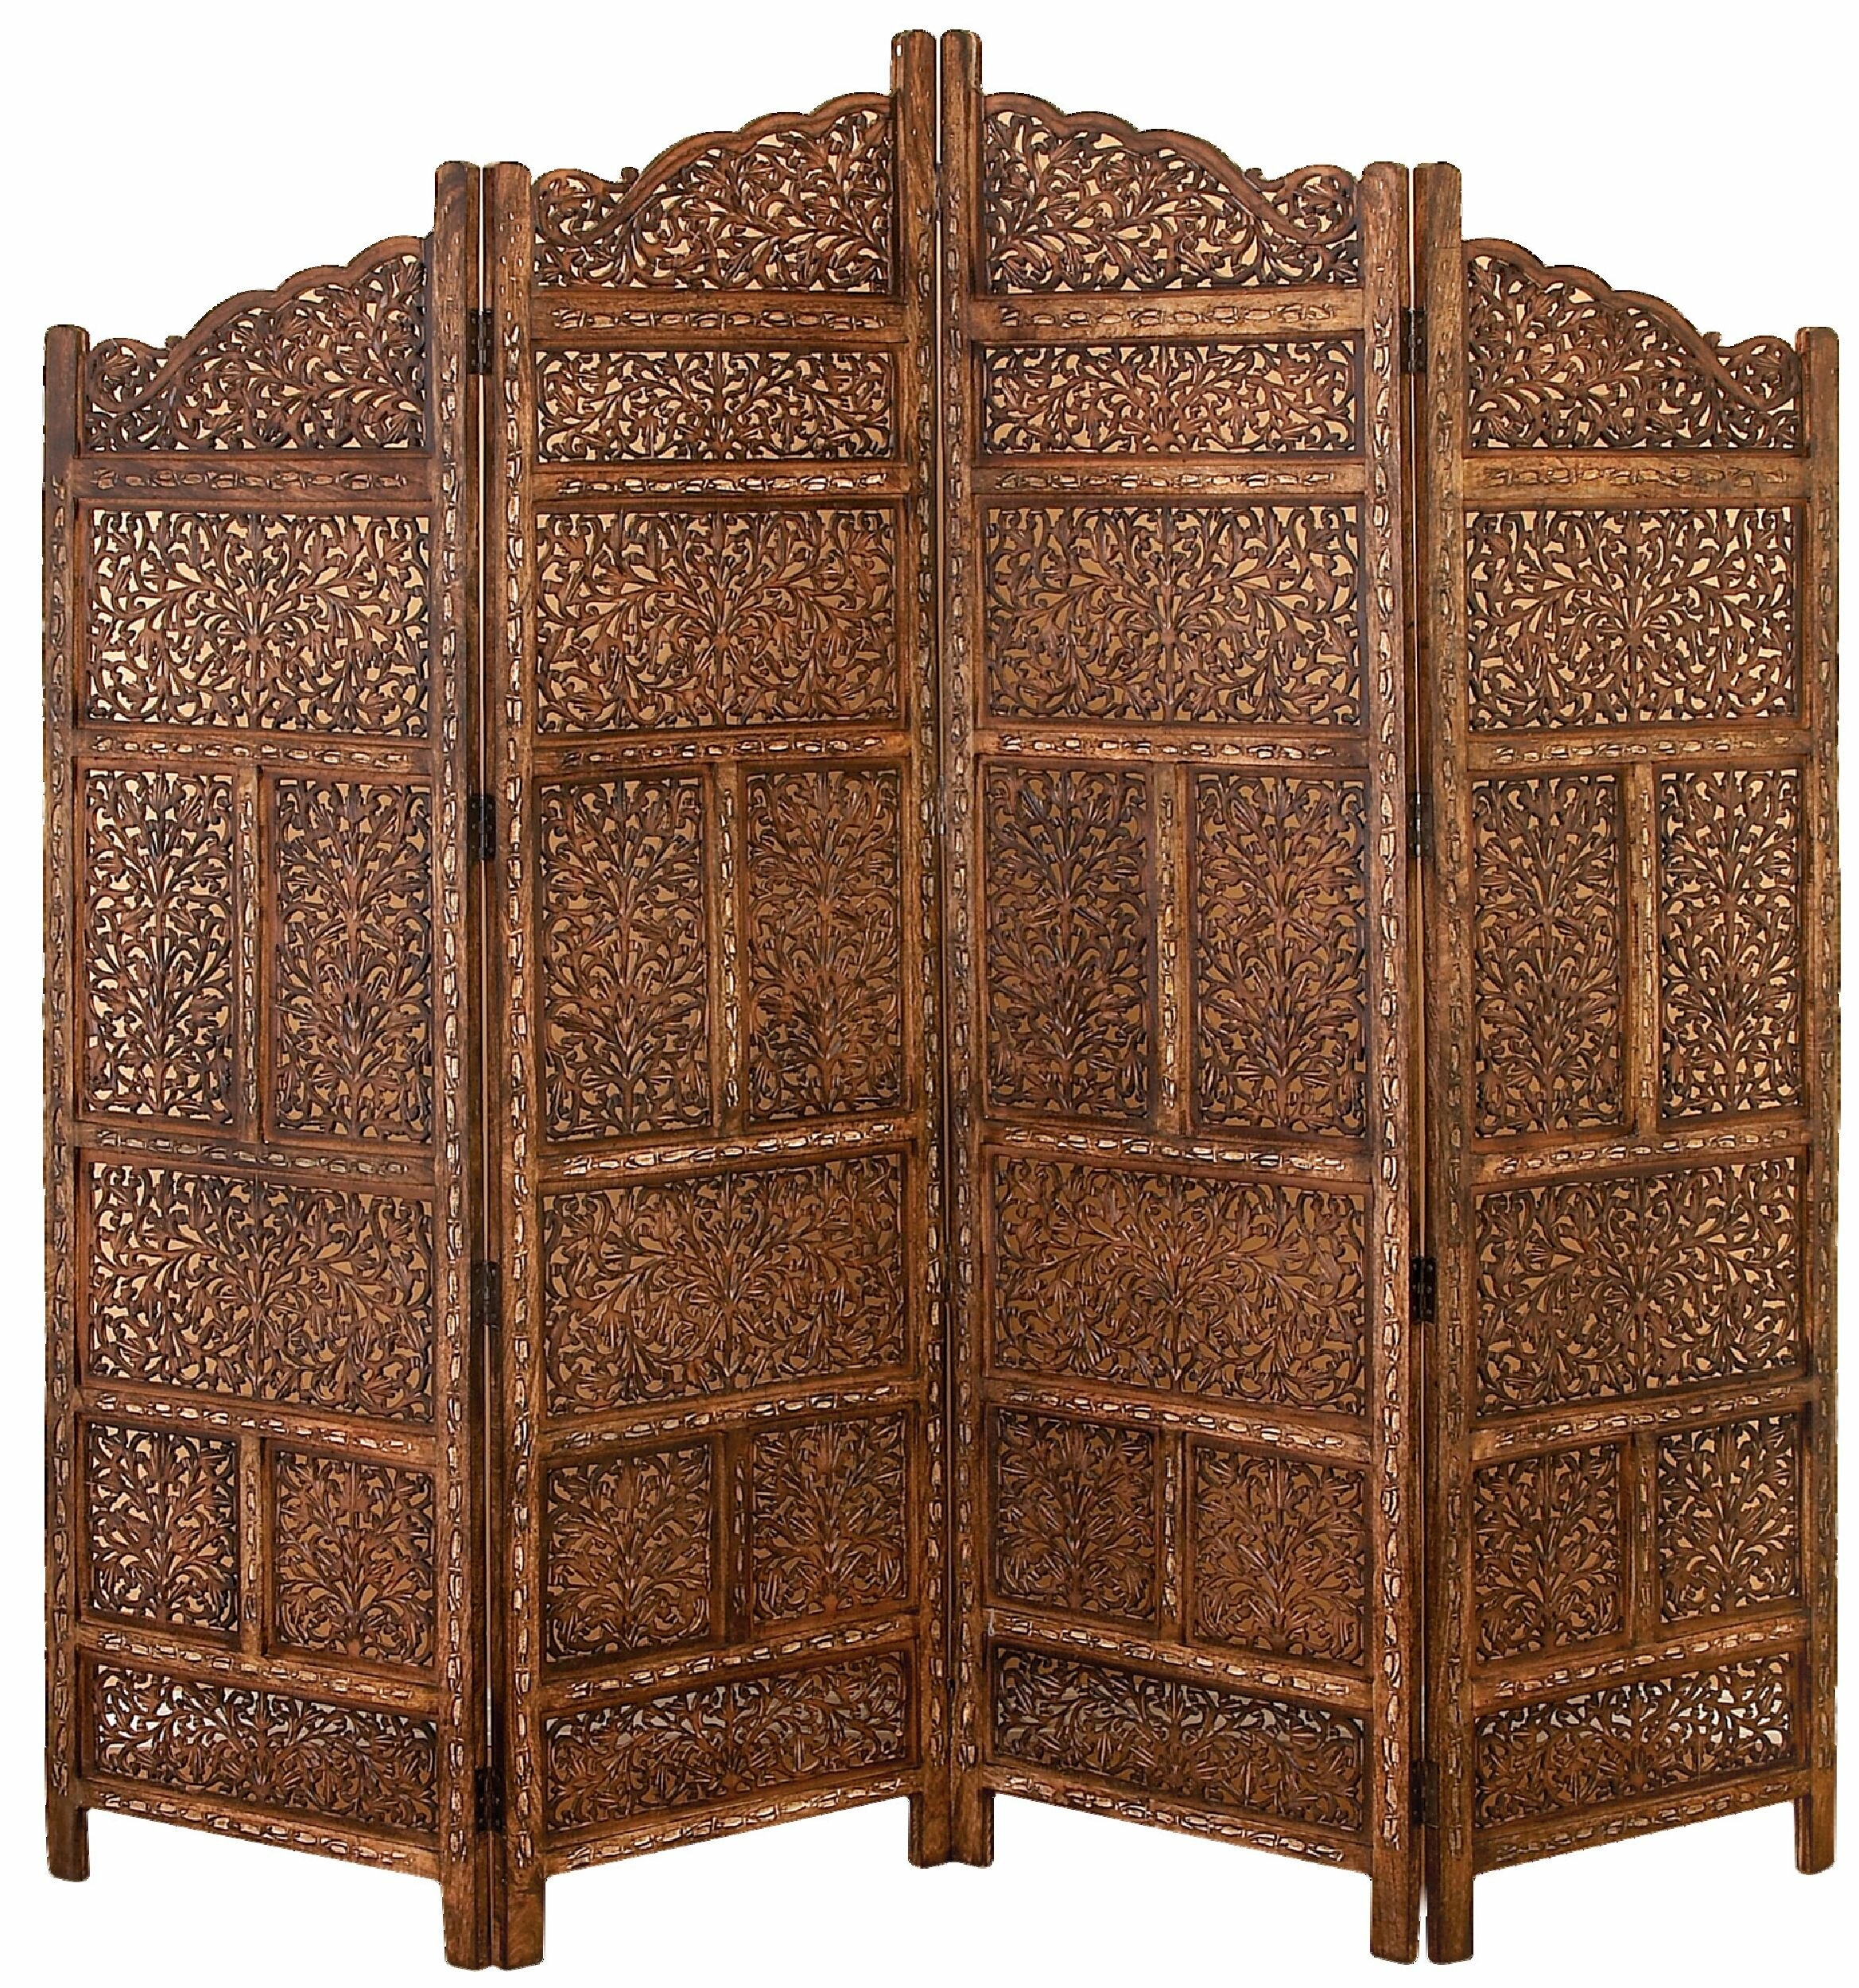 4 Panel Moroccan Style Hand Carved Solid Wood Screen Room Divider, Brown Finish